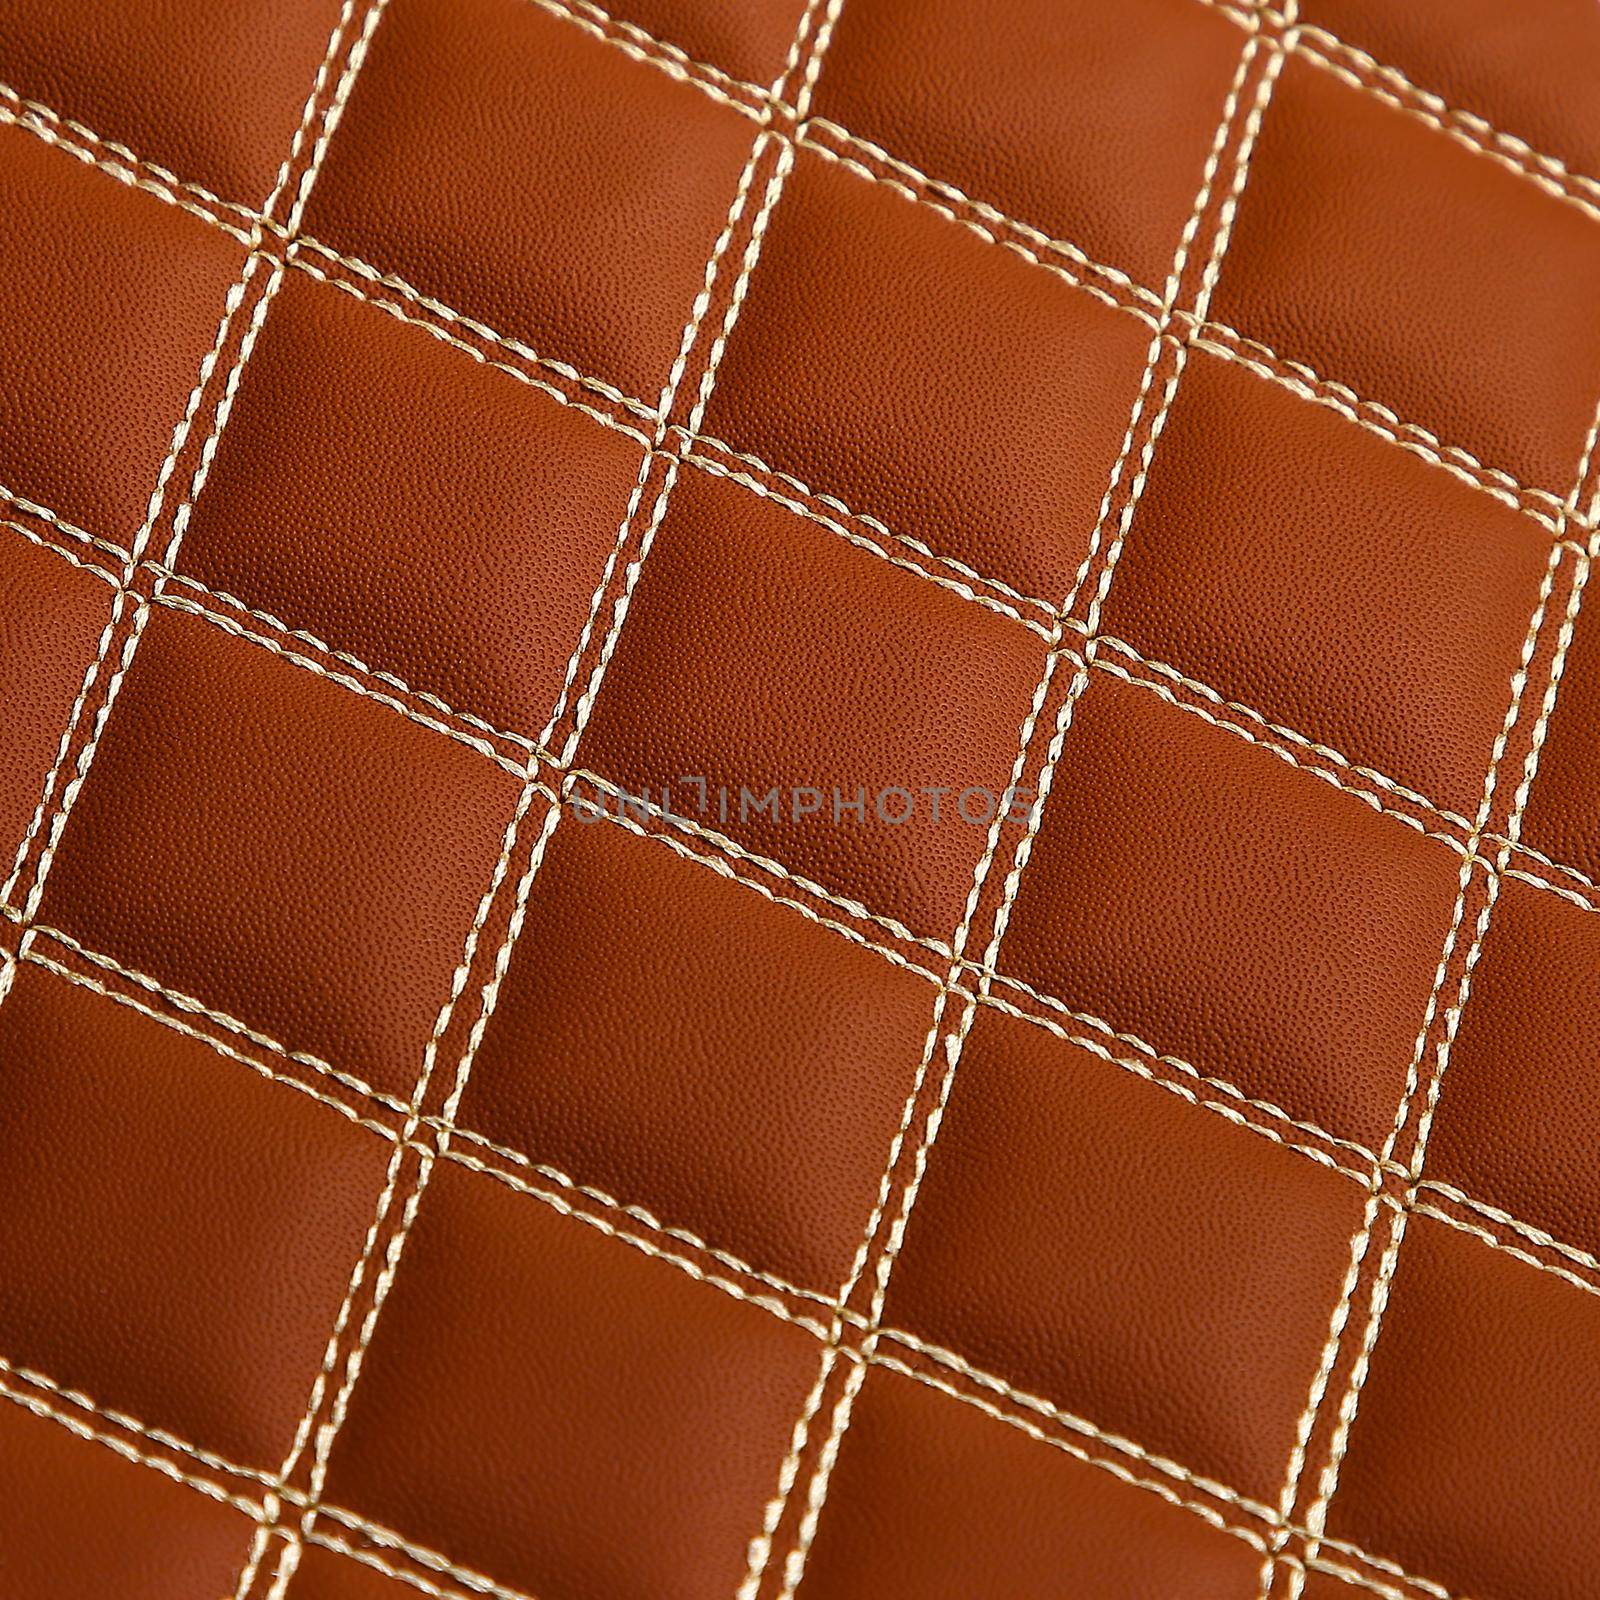 Leather background with sewing stitch by A_Karim